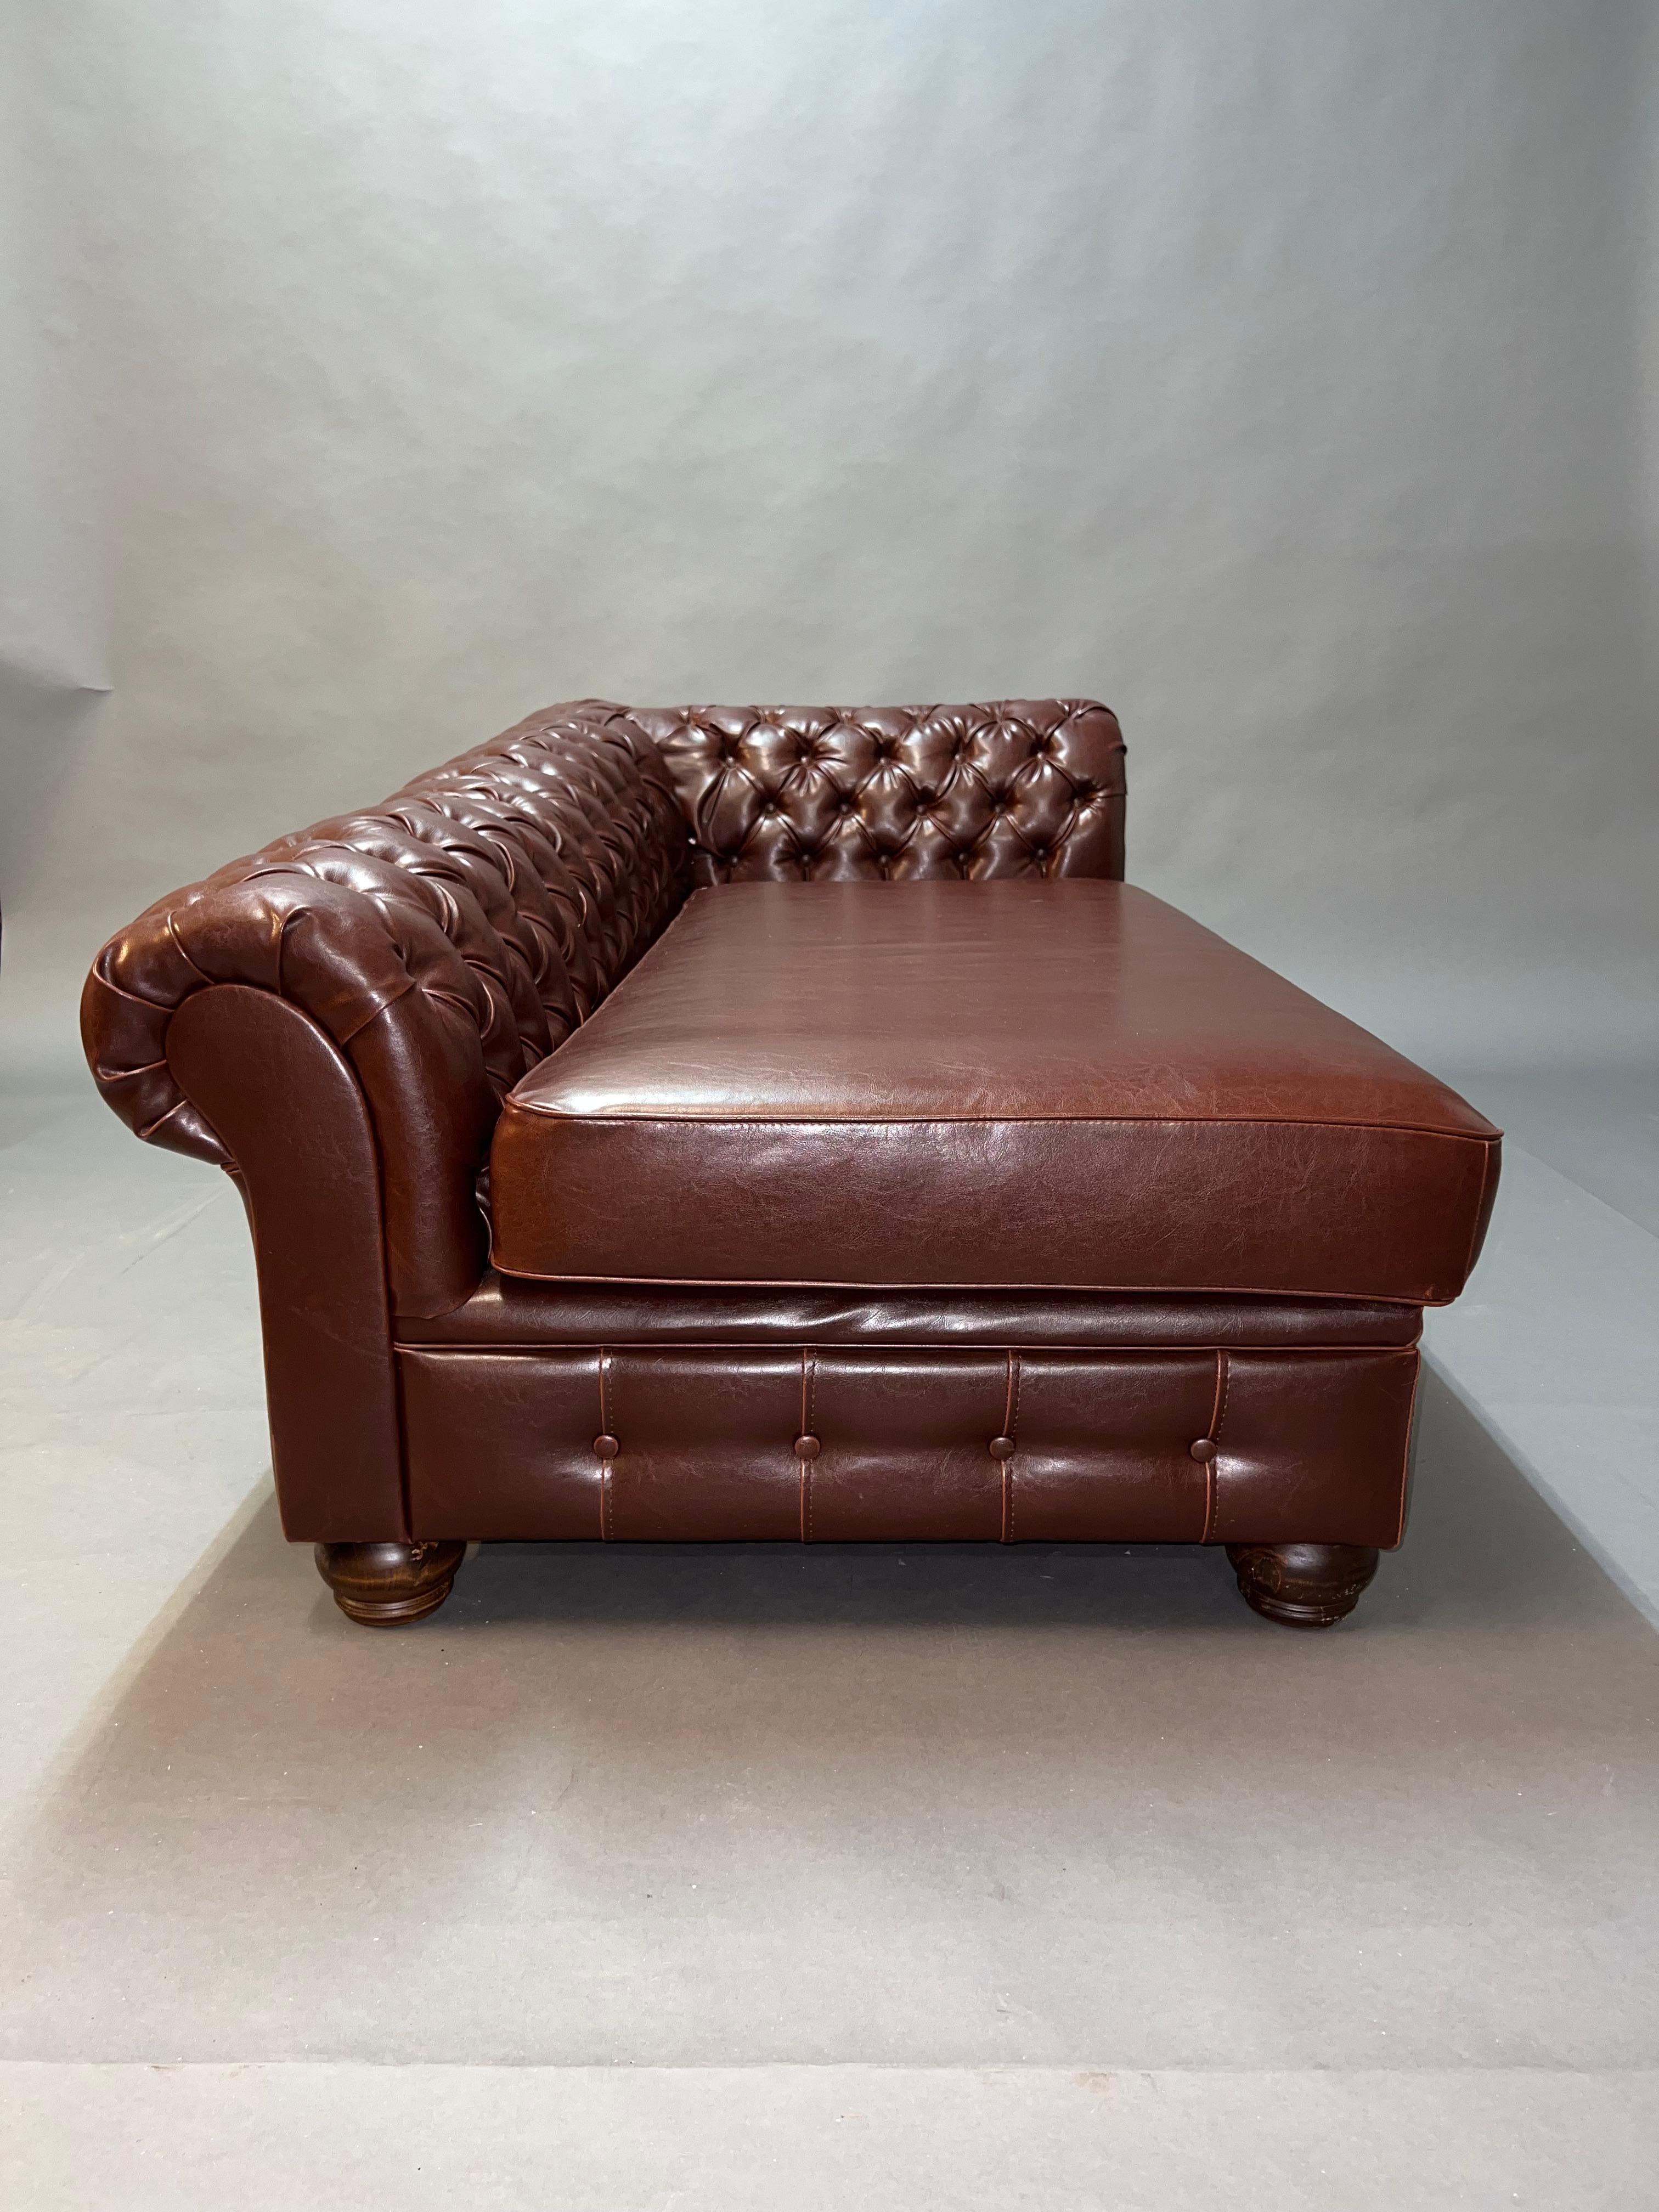 Lovely Vintage Chesterfield Brown Leather Look Chaise Lounge Daybed Sofa For Sale 1